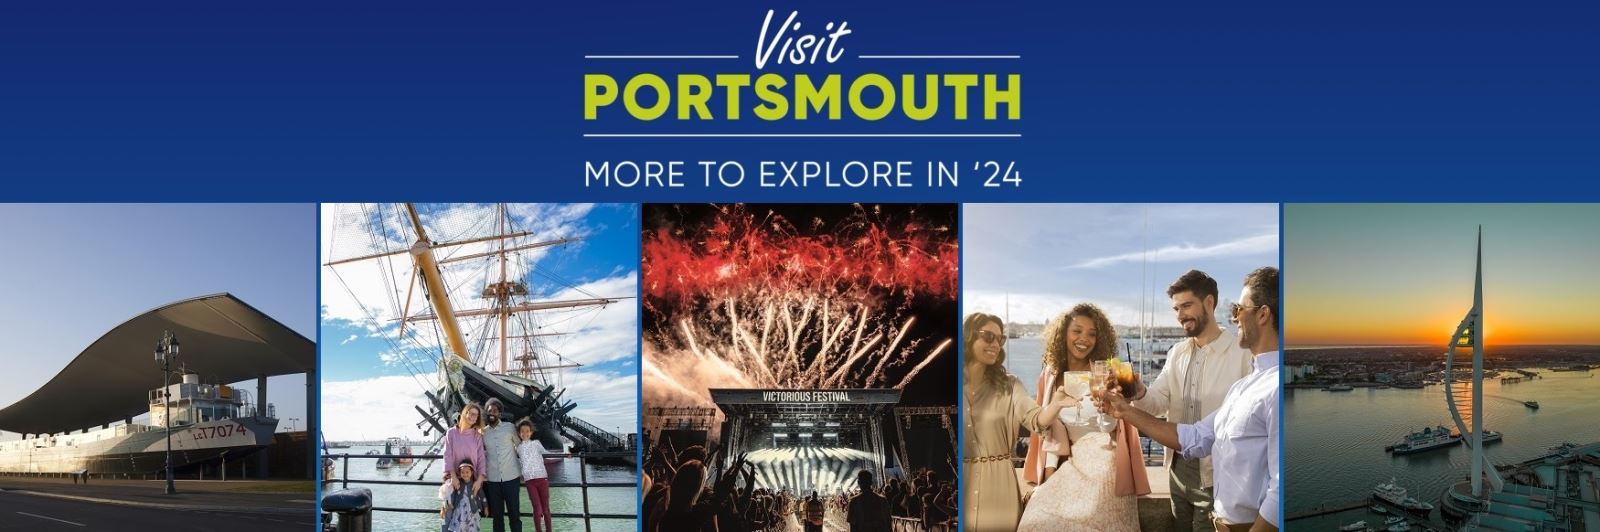 Visit Portsmouth: More to Explore in '24!